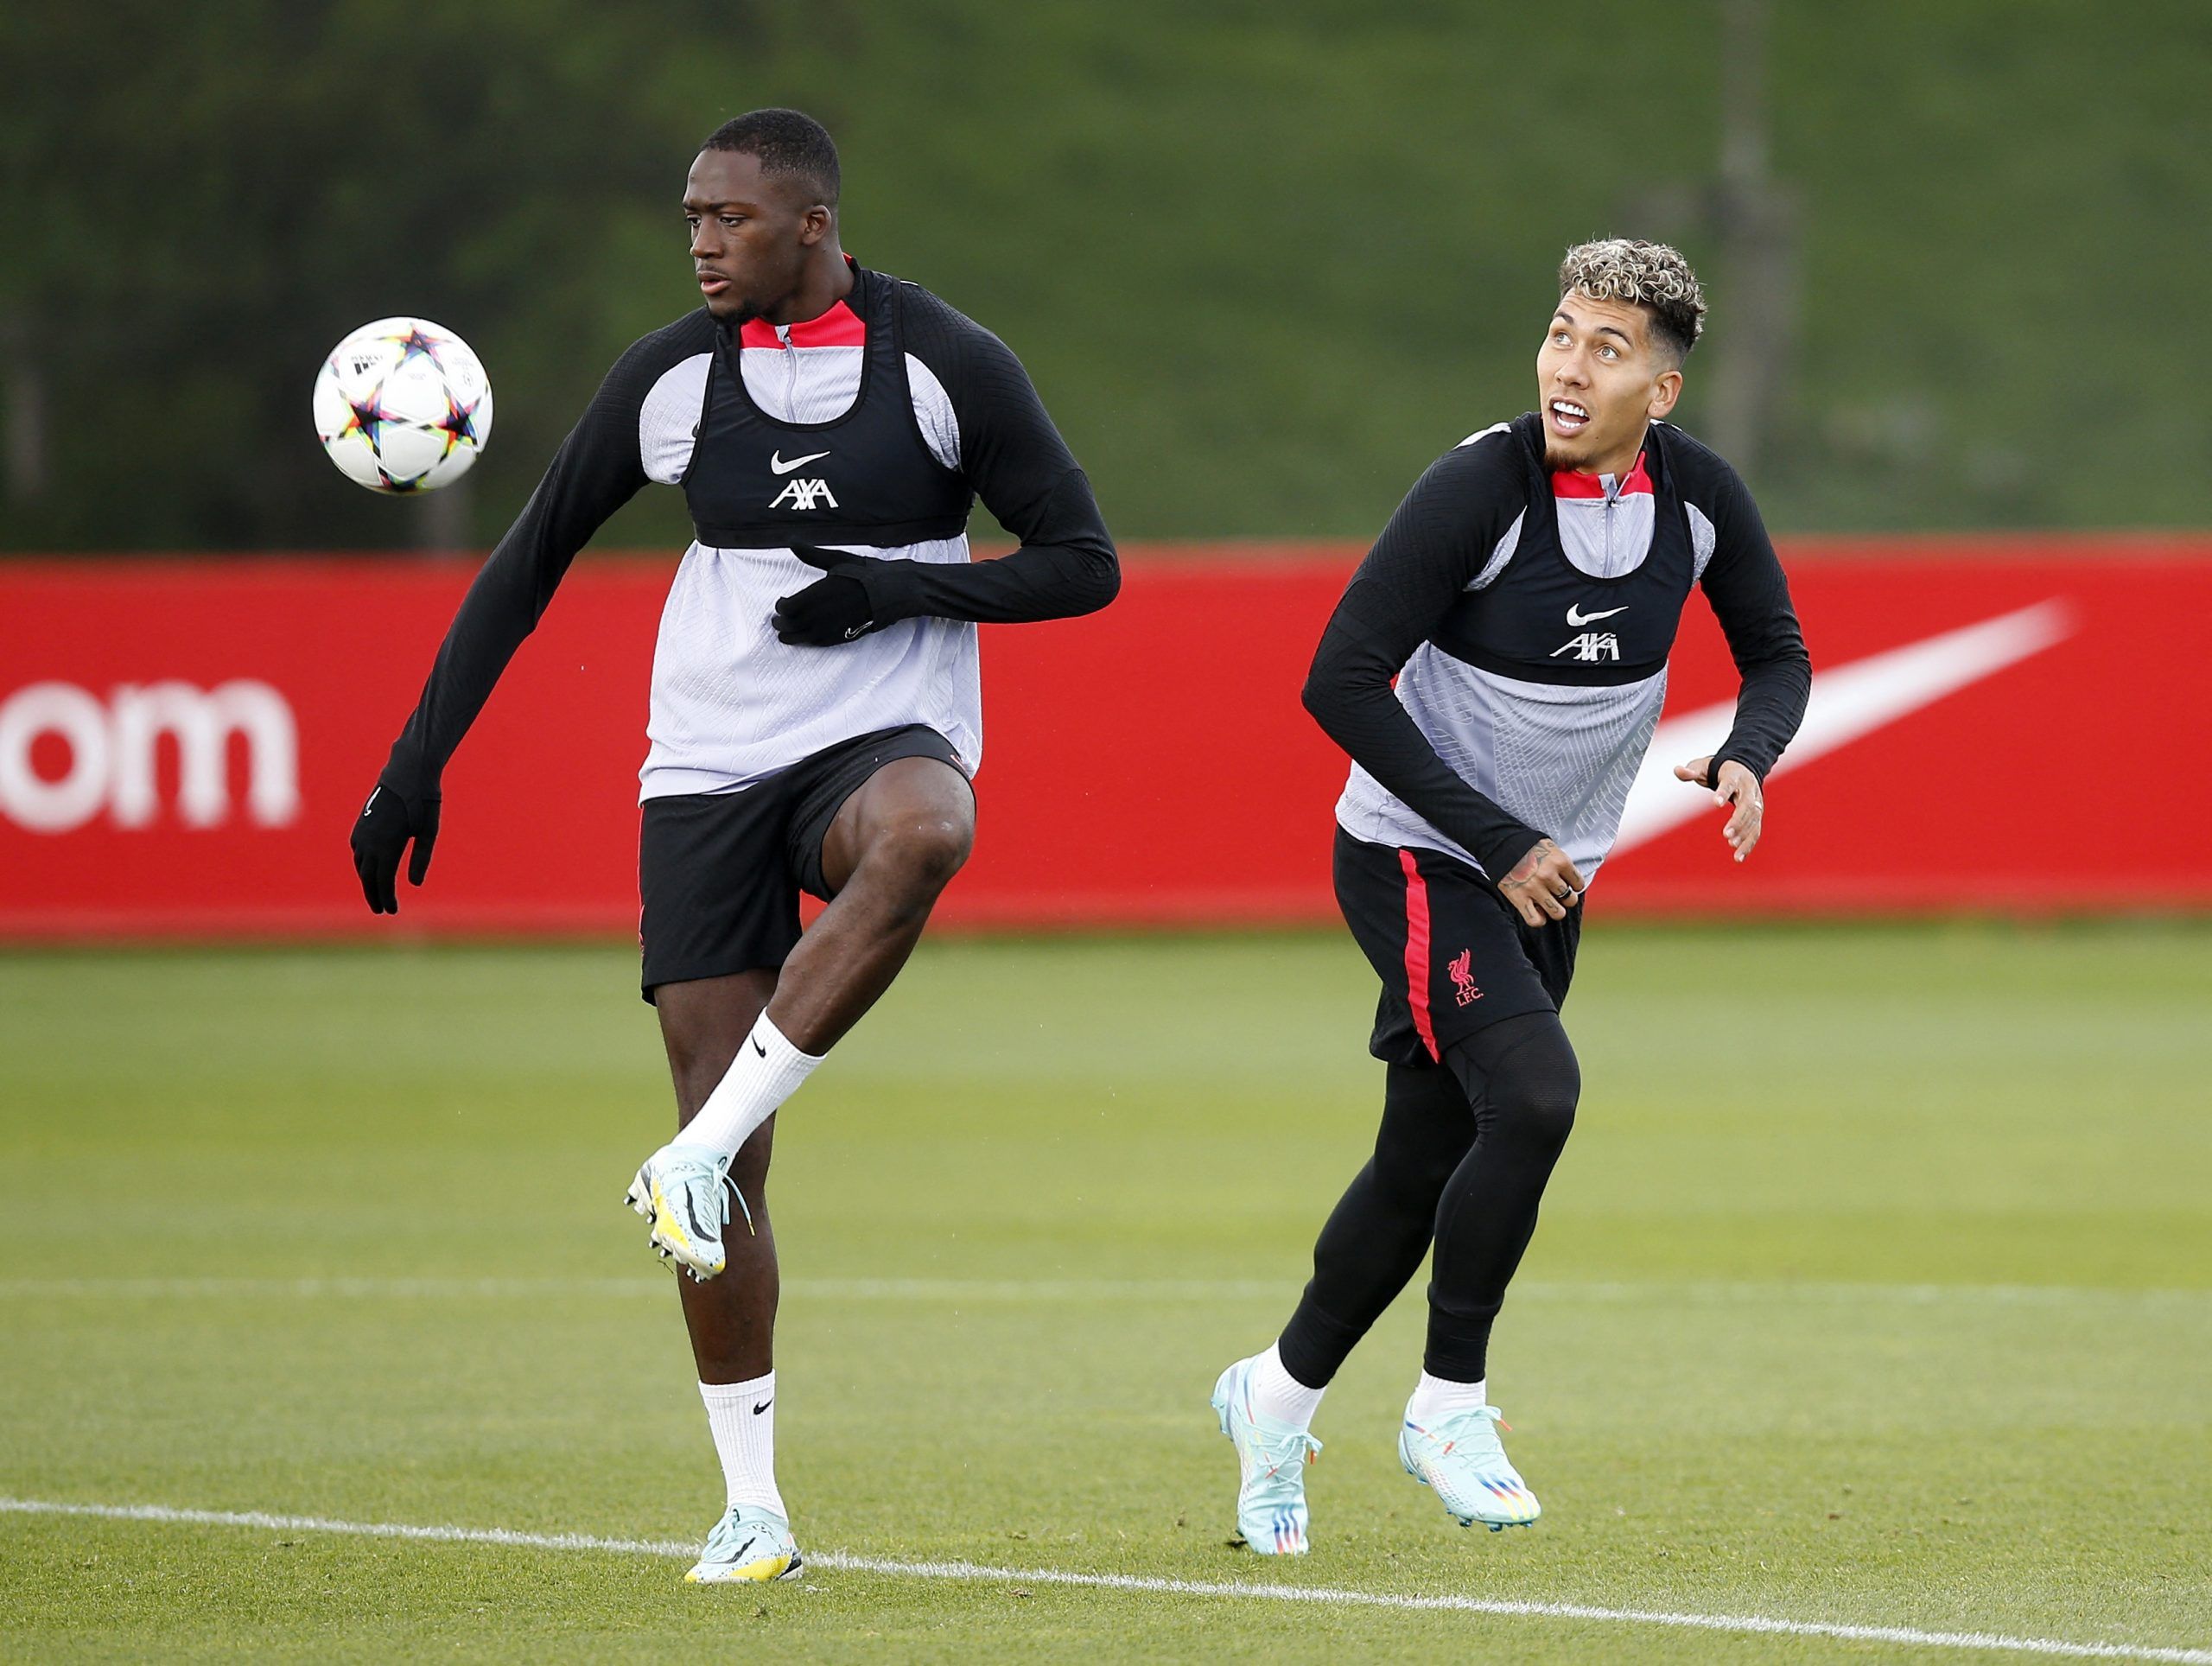 Soccer Football - Champions League - Liverpool Training - AXA Training Centre, Liverpool, Britain - October 11, 2022 Liverpool's Ibrahima Konate and Roberto Firmino during training Action Images via Reuters/Craig Brough